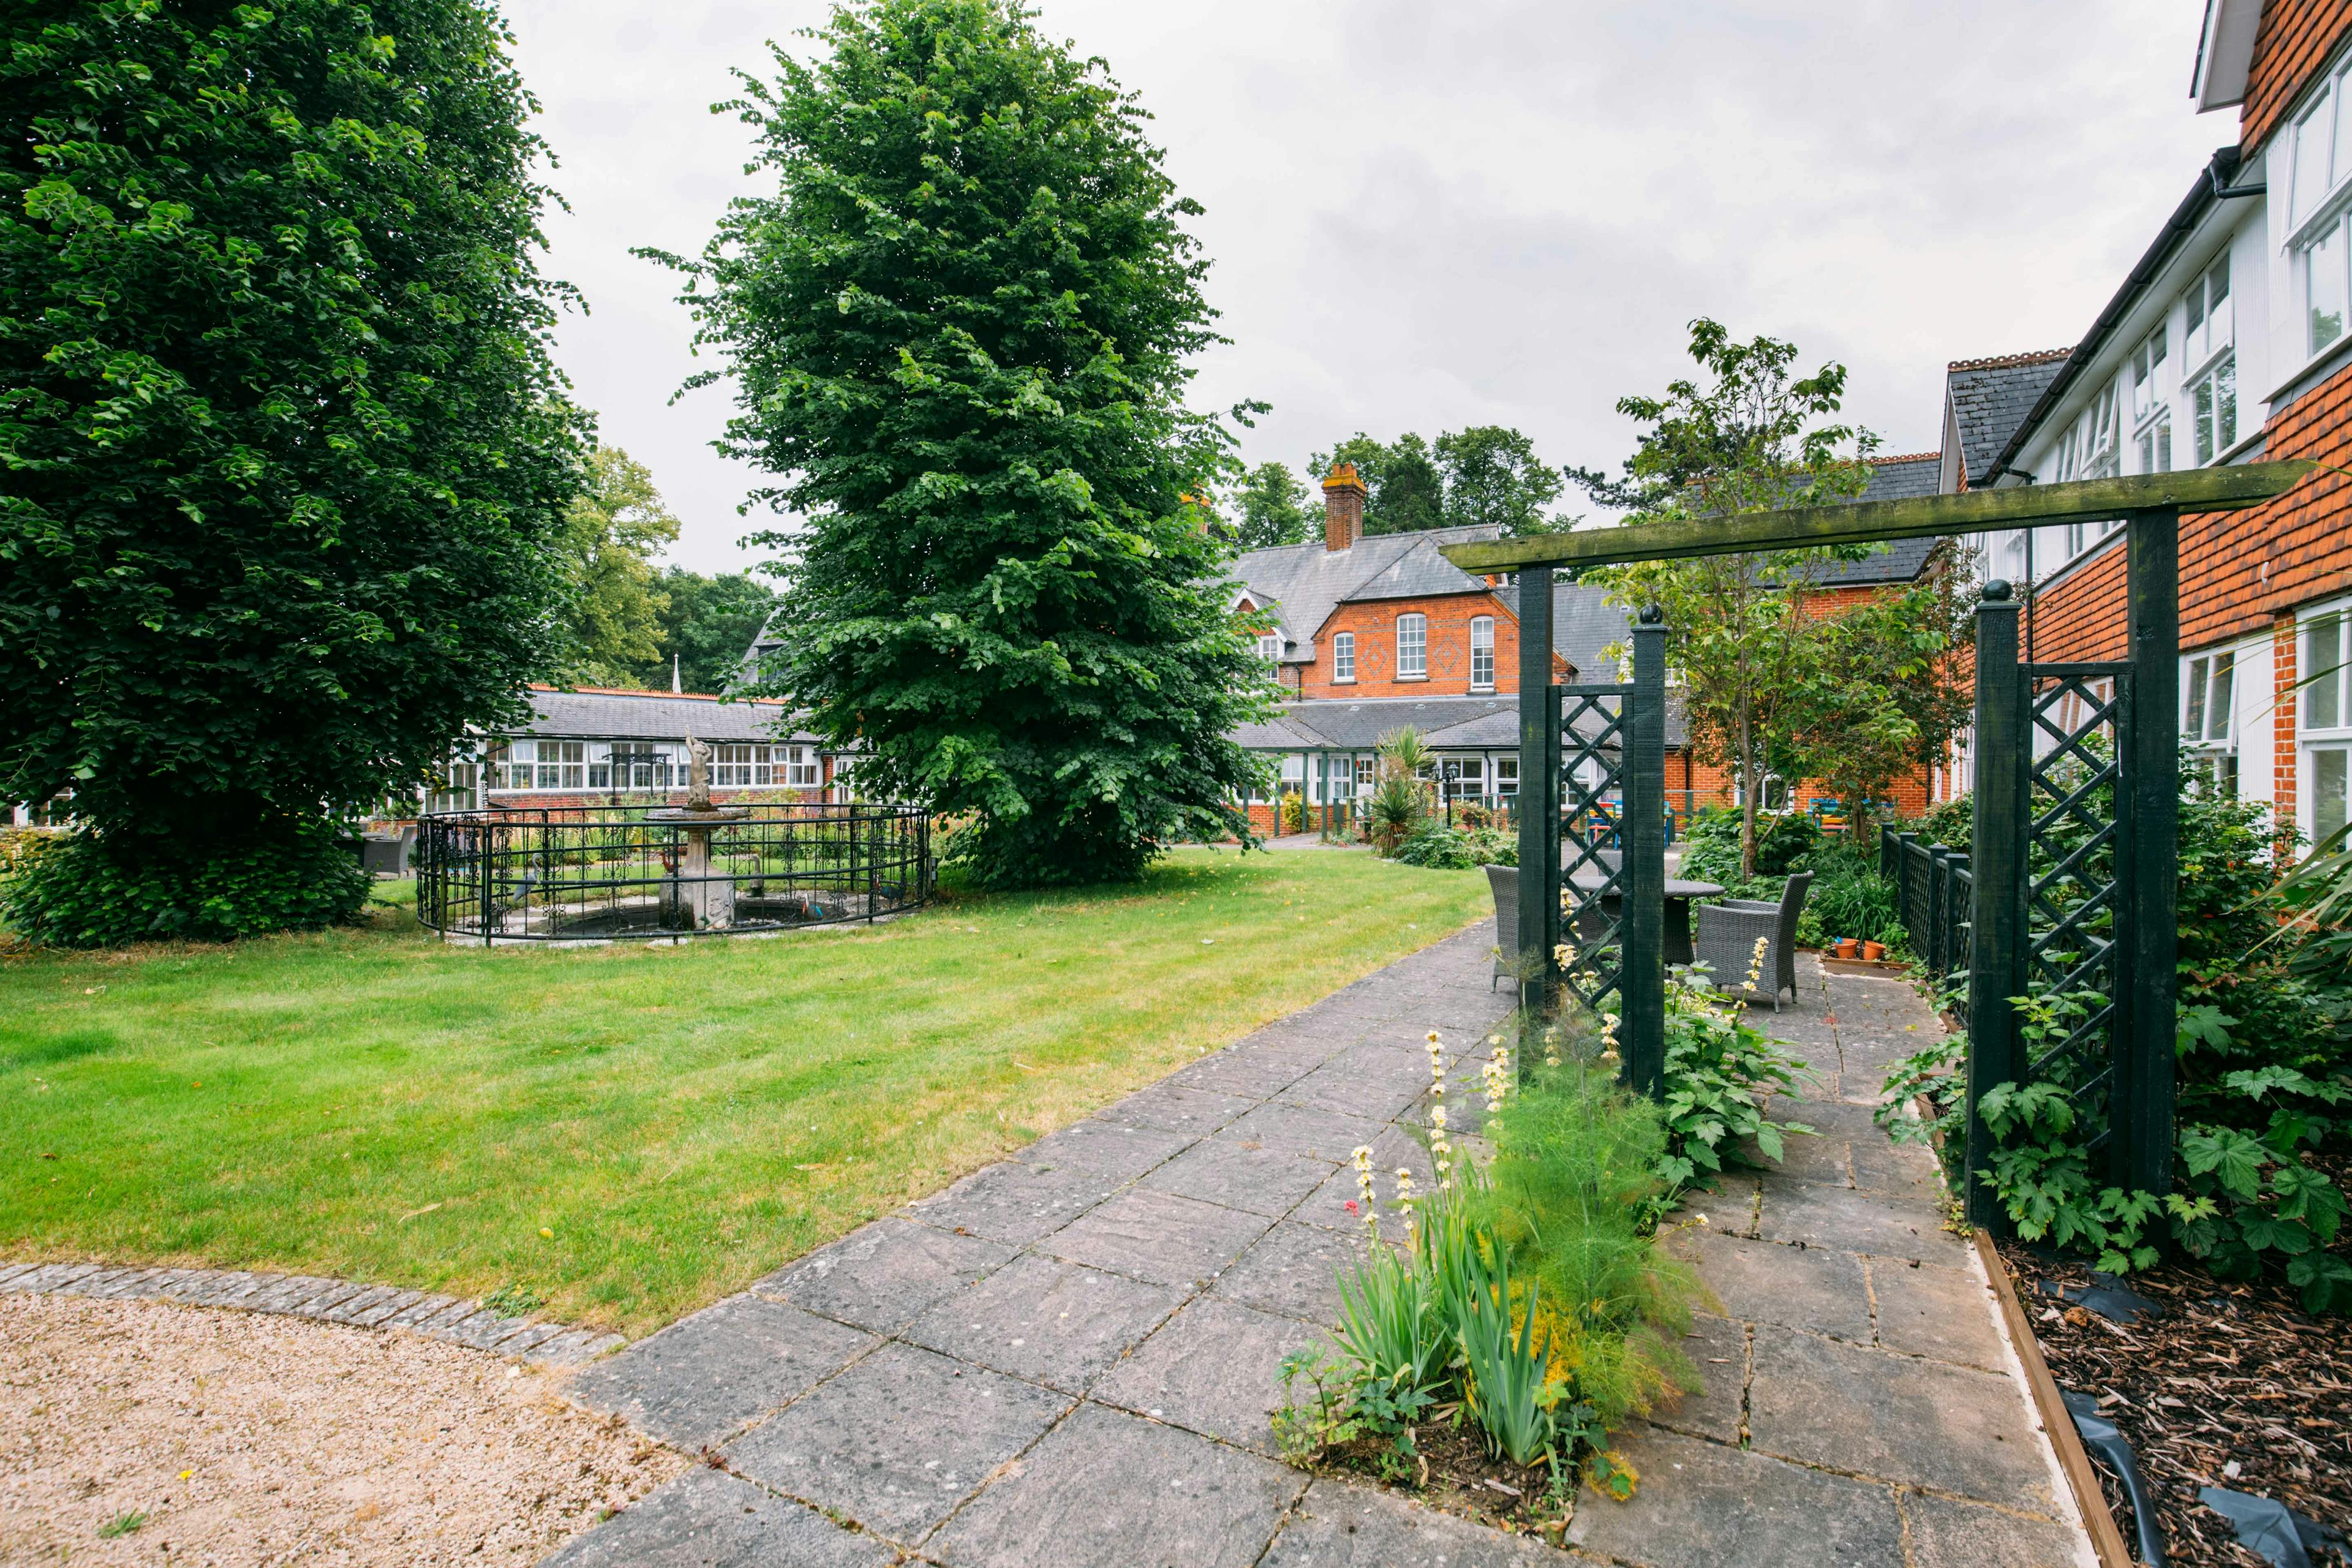 Garden at St Thomas Care Home in Basingstoke, Hampshire